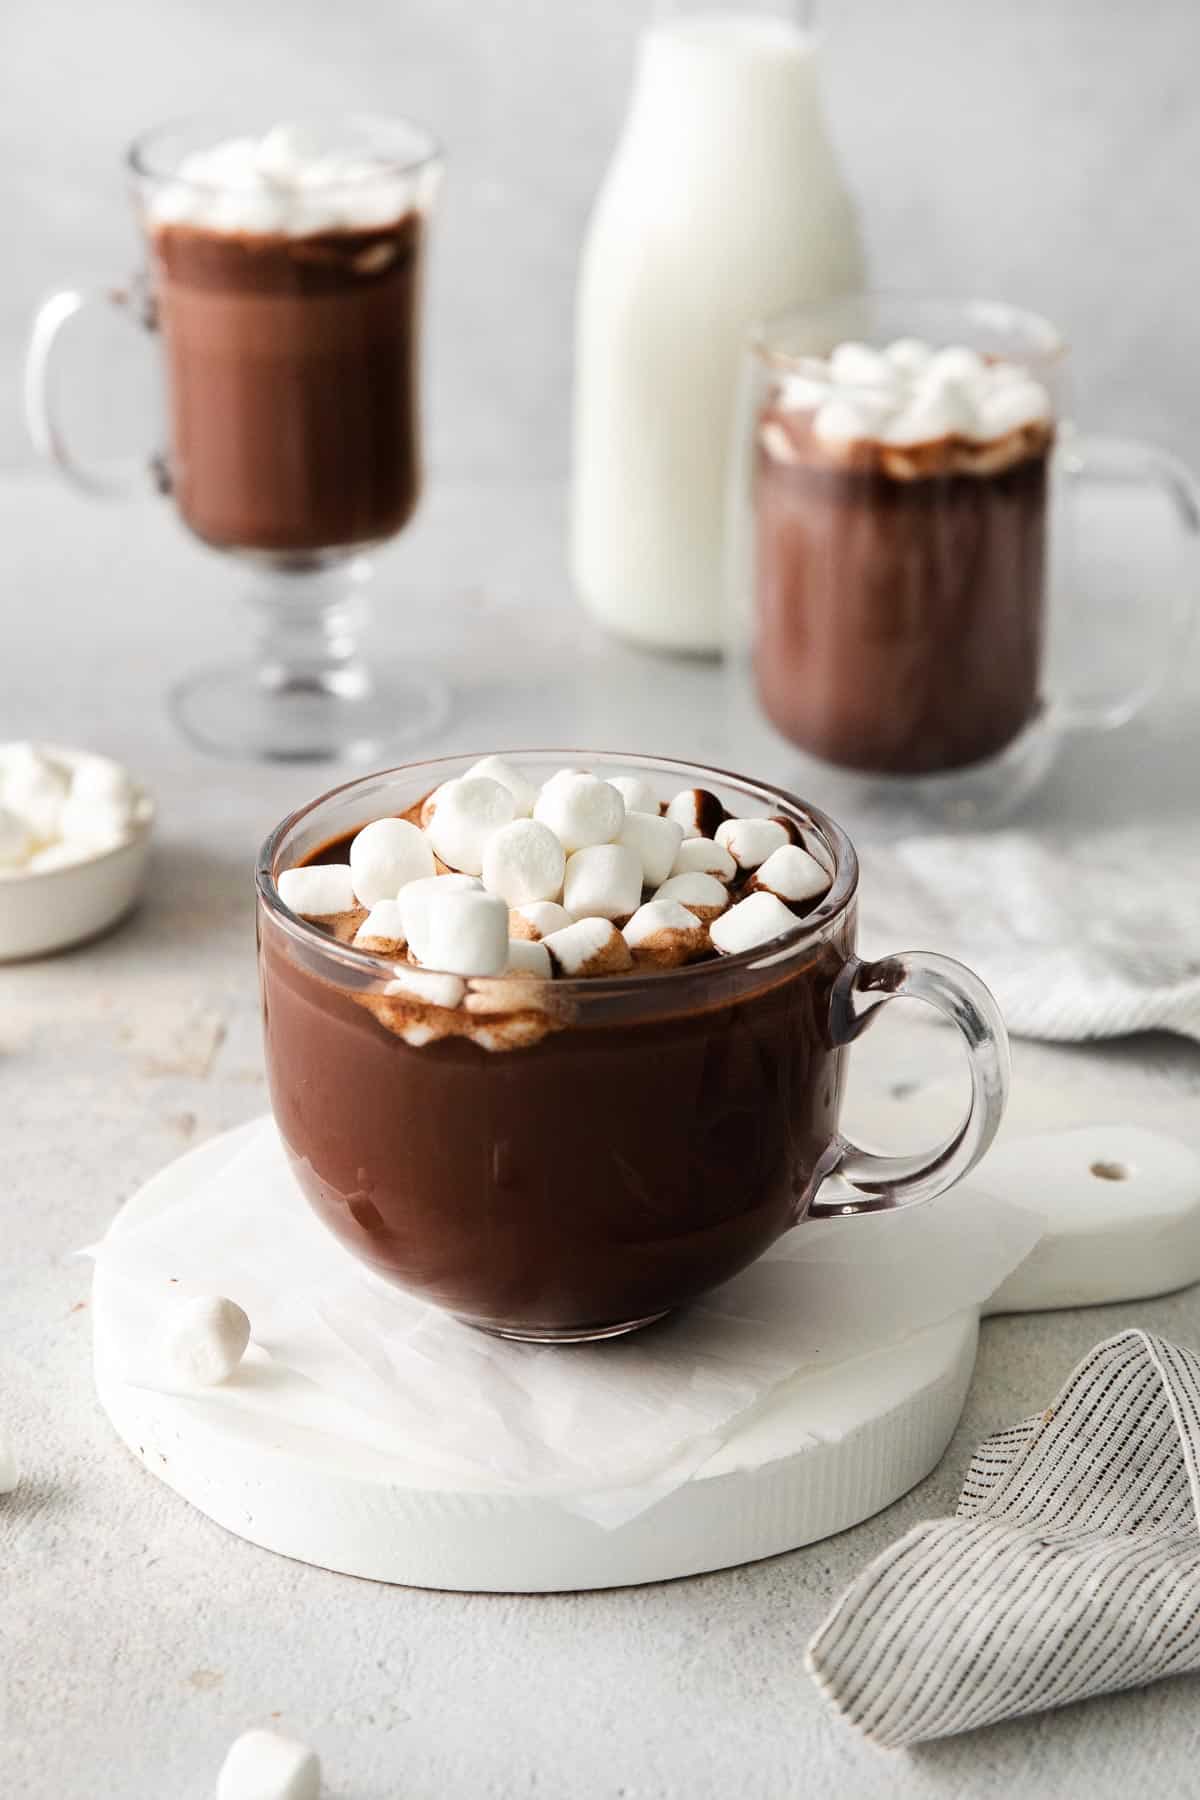 A glass mug of hot chocolate with marshmallows on top, and more mugs of hot chocolate in the background